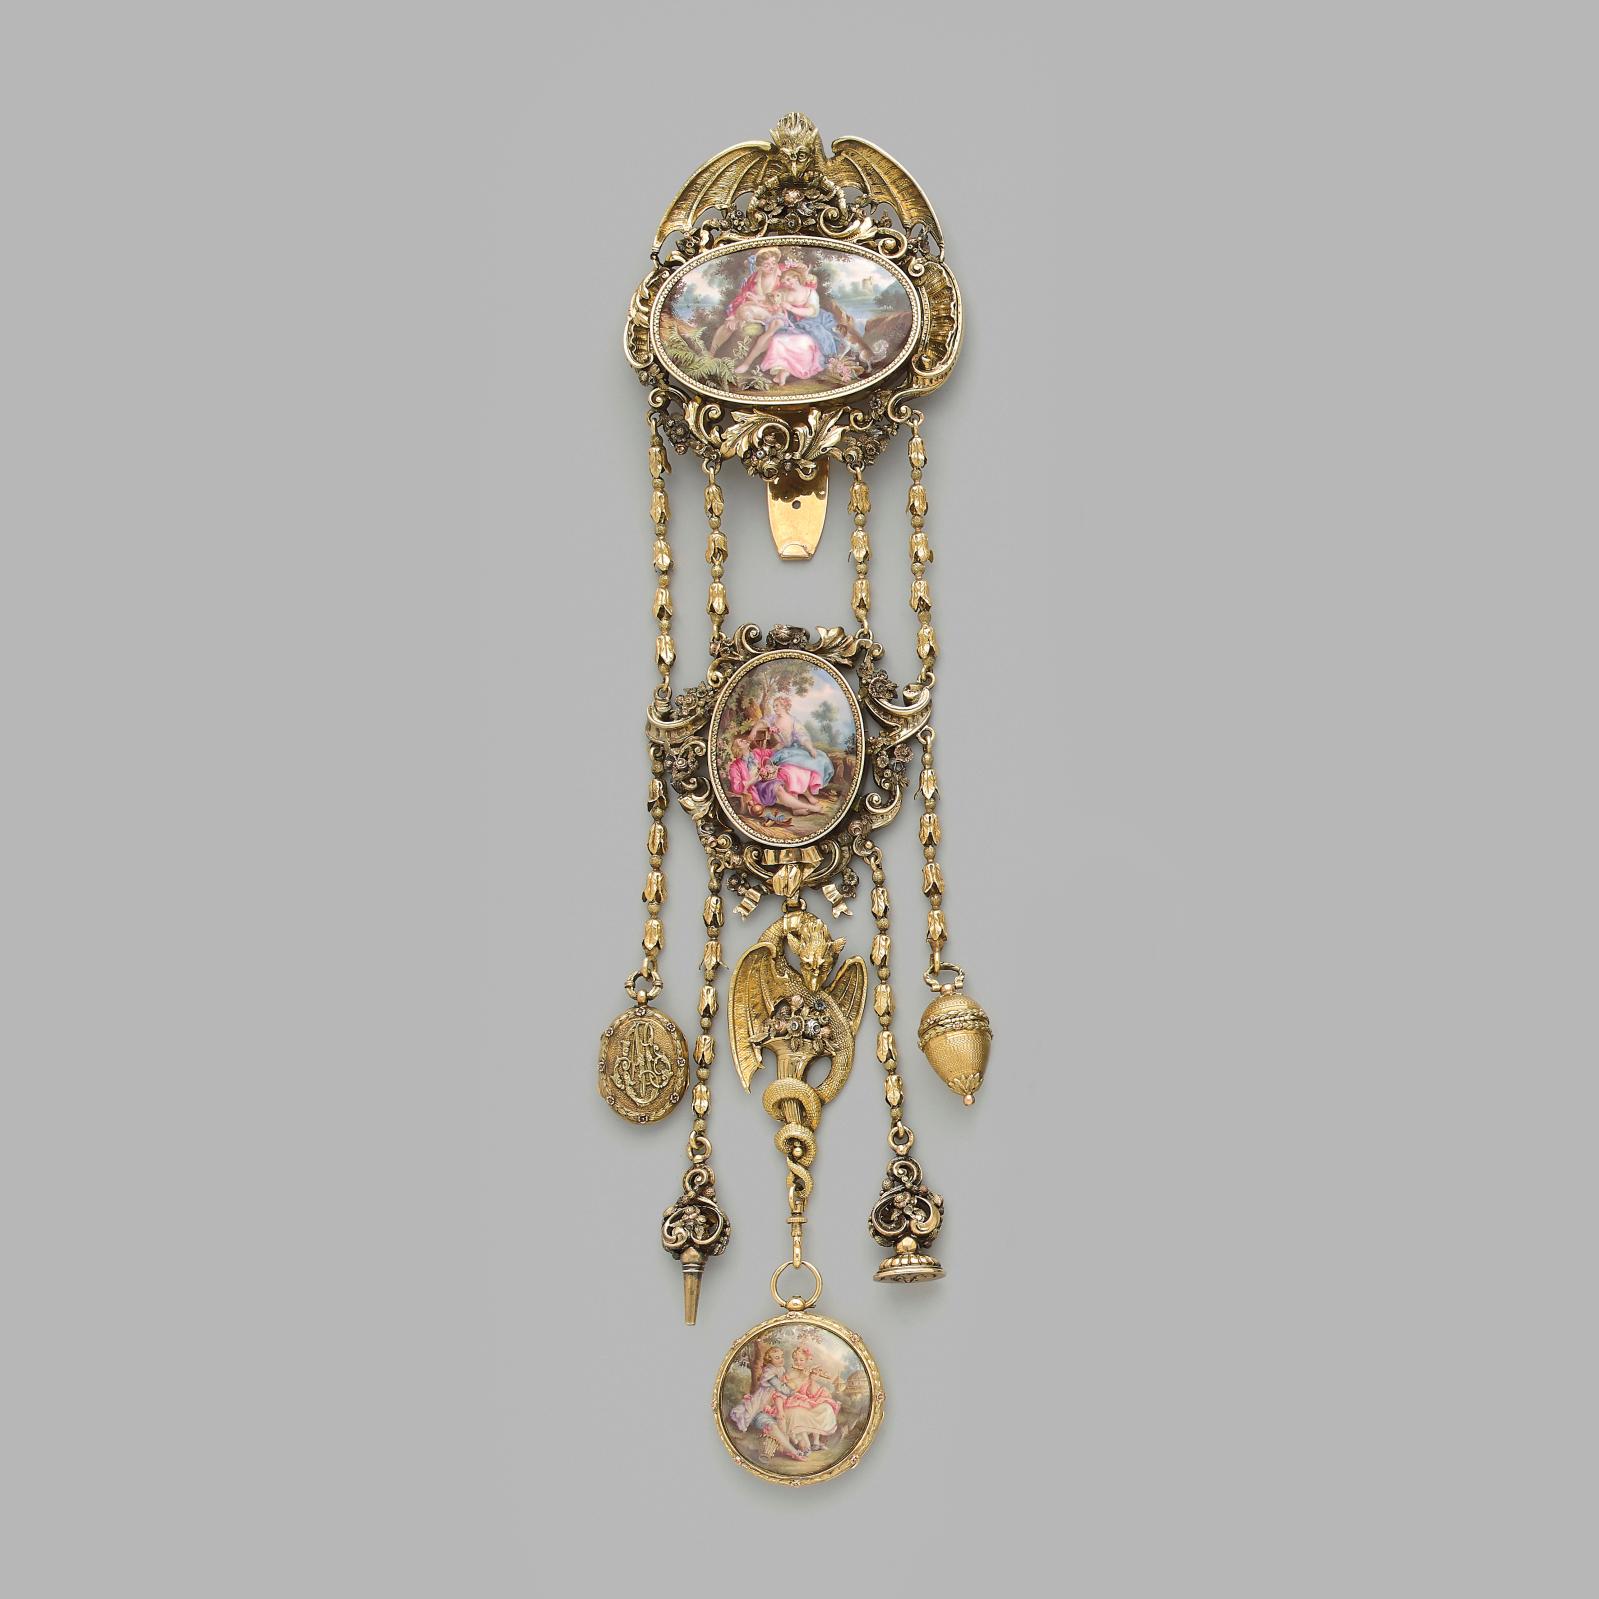 €6,60418th century, chatelaine in openwork gold in several colors with decoration of a chimera, dragon, agraffes with foliage and floral b